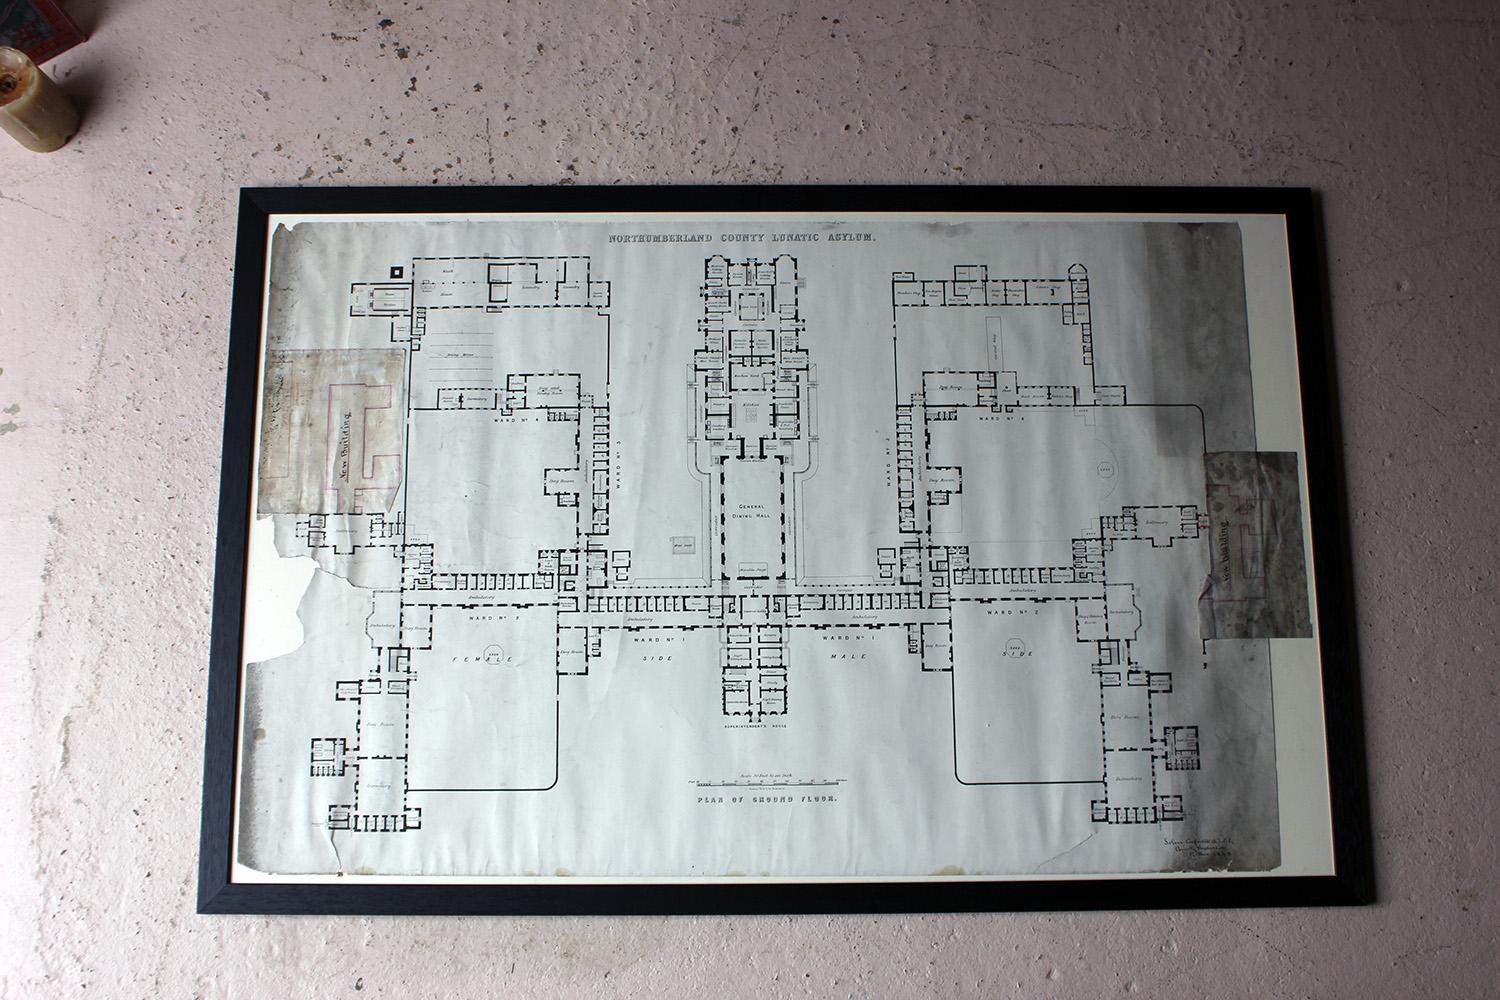 Large Victorian Architect’s Site Plan for Northumberland County Lunatic Asylum 5